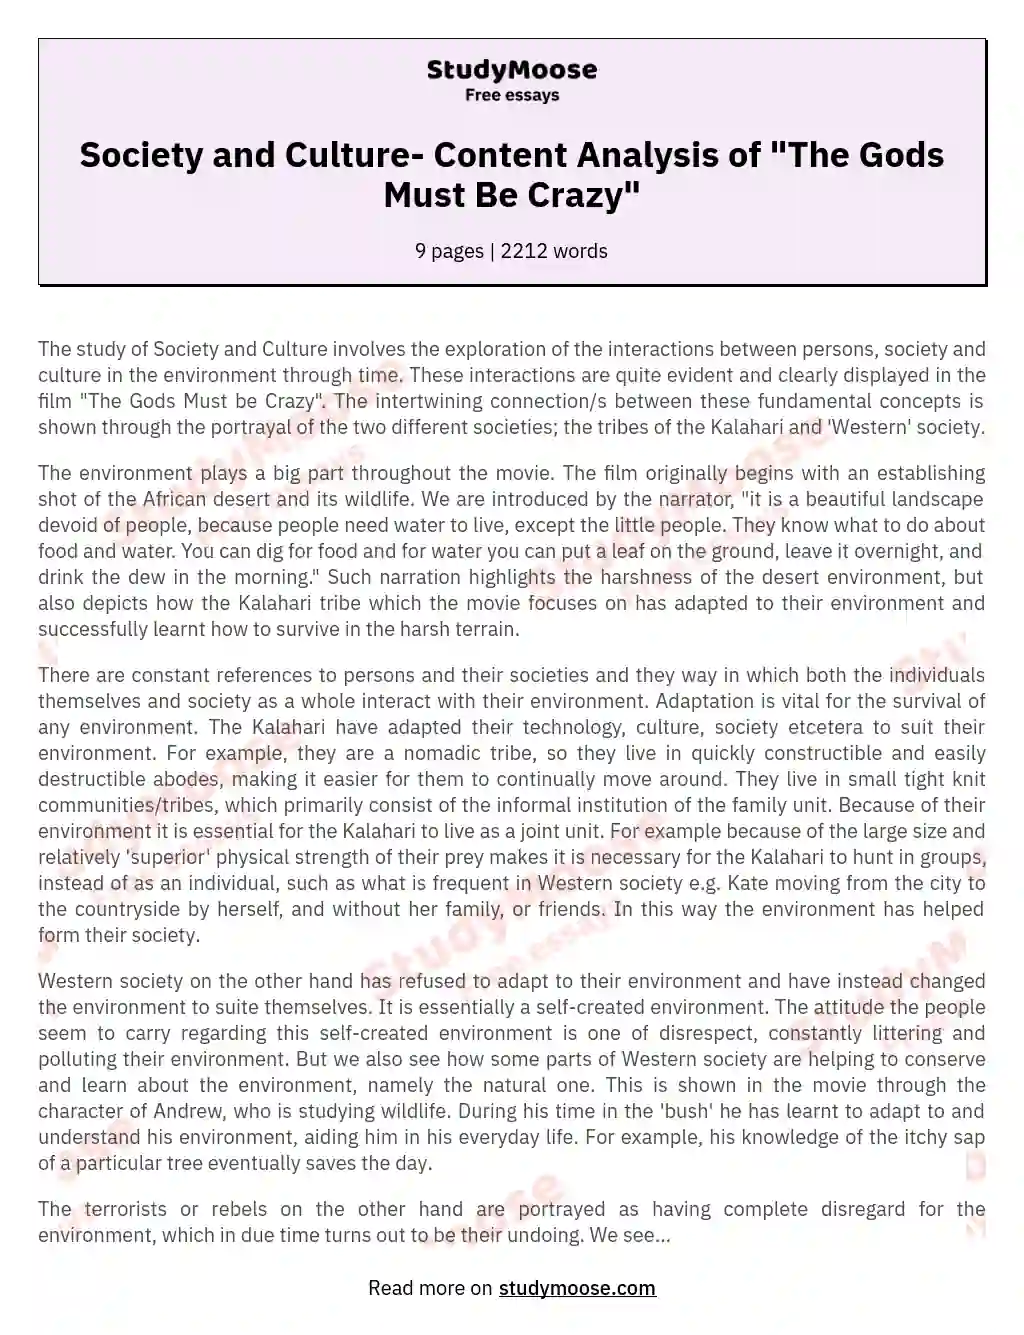 Society and Culture- Content Analysis of "The Gods Must Be Crazy" essay